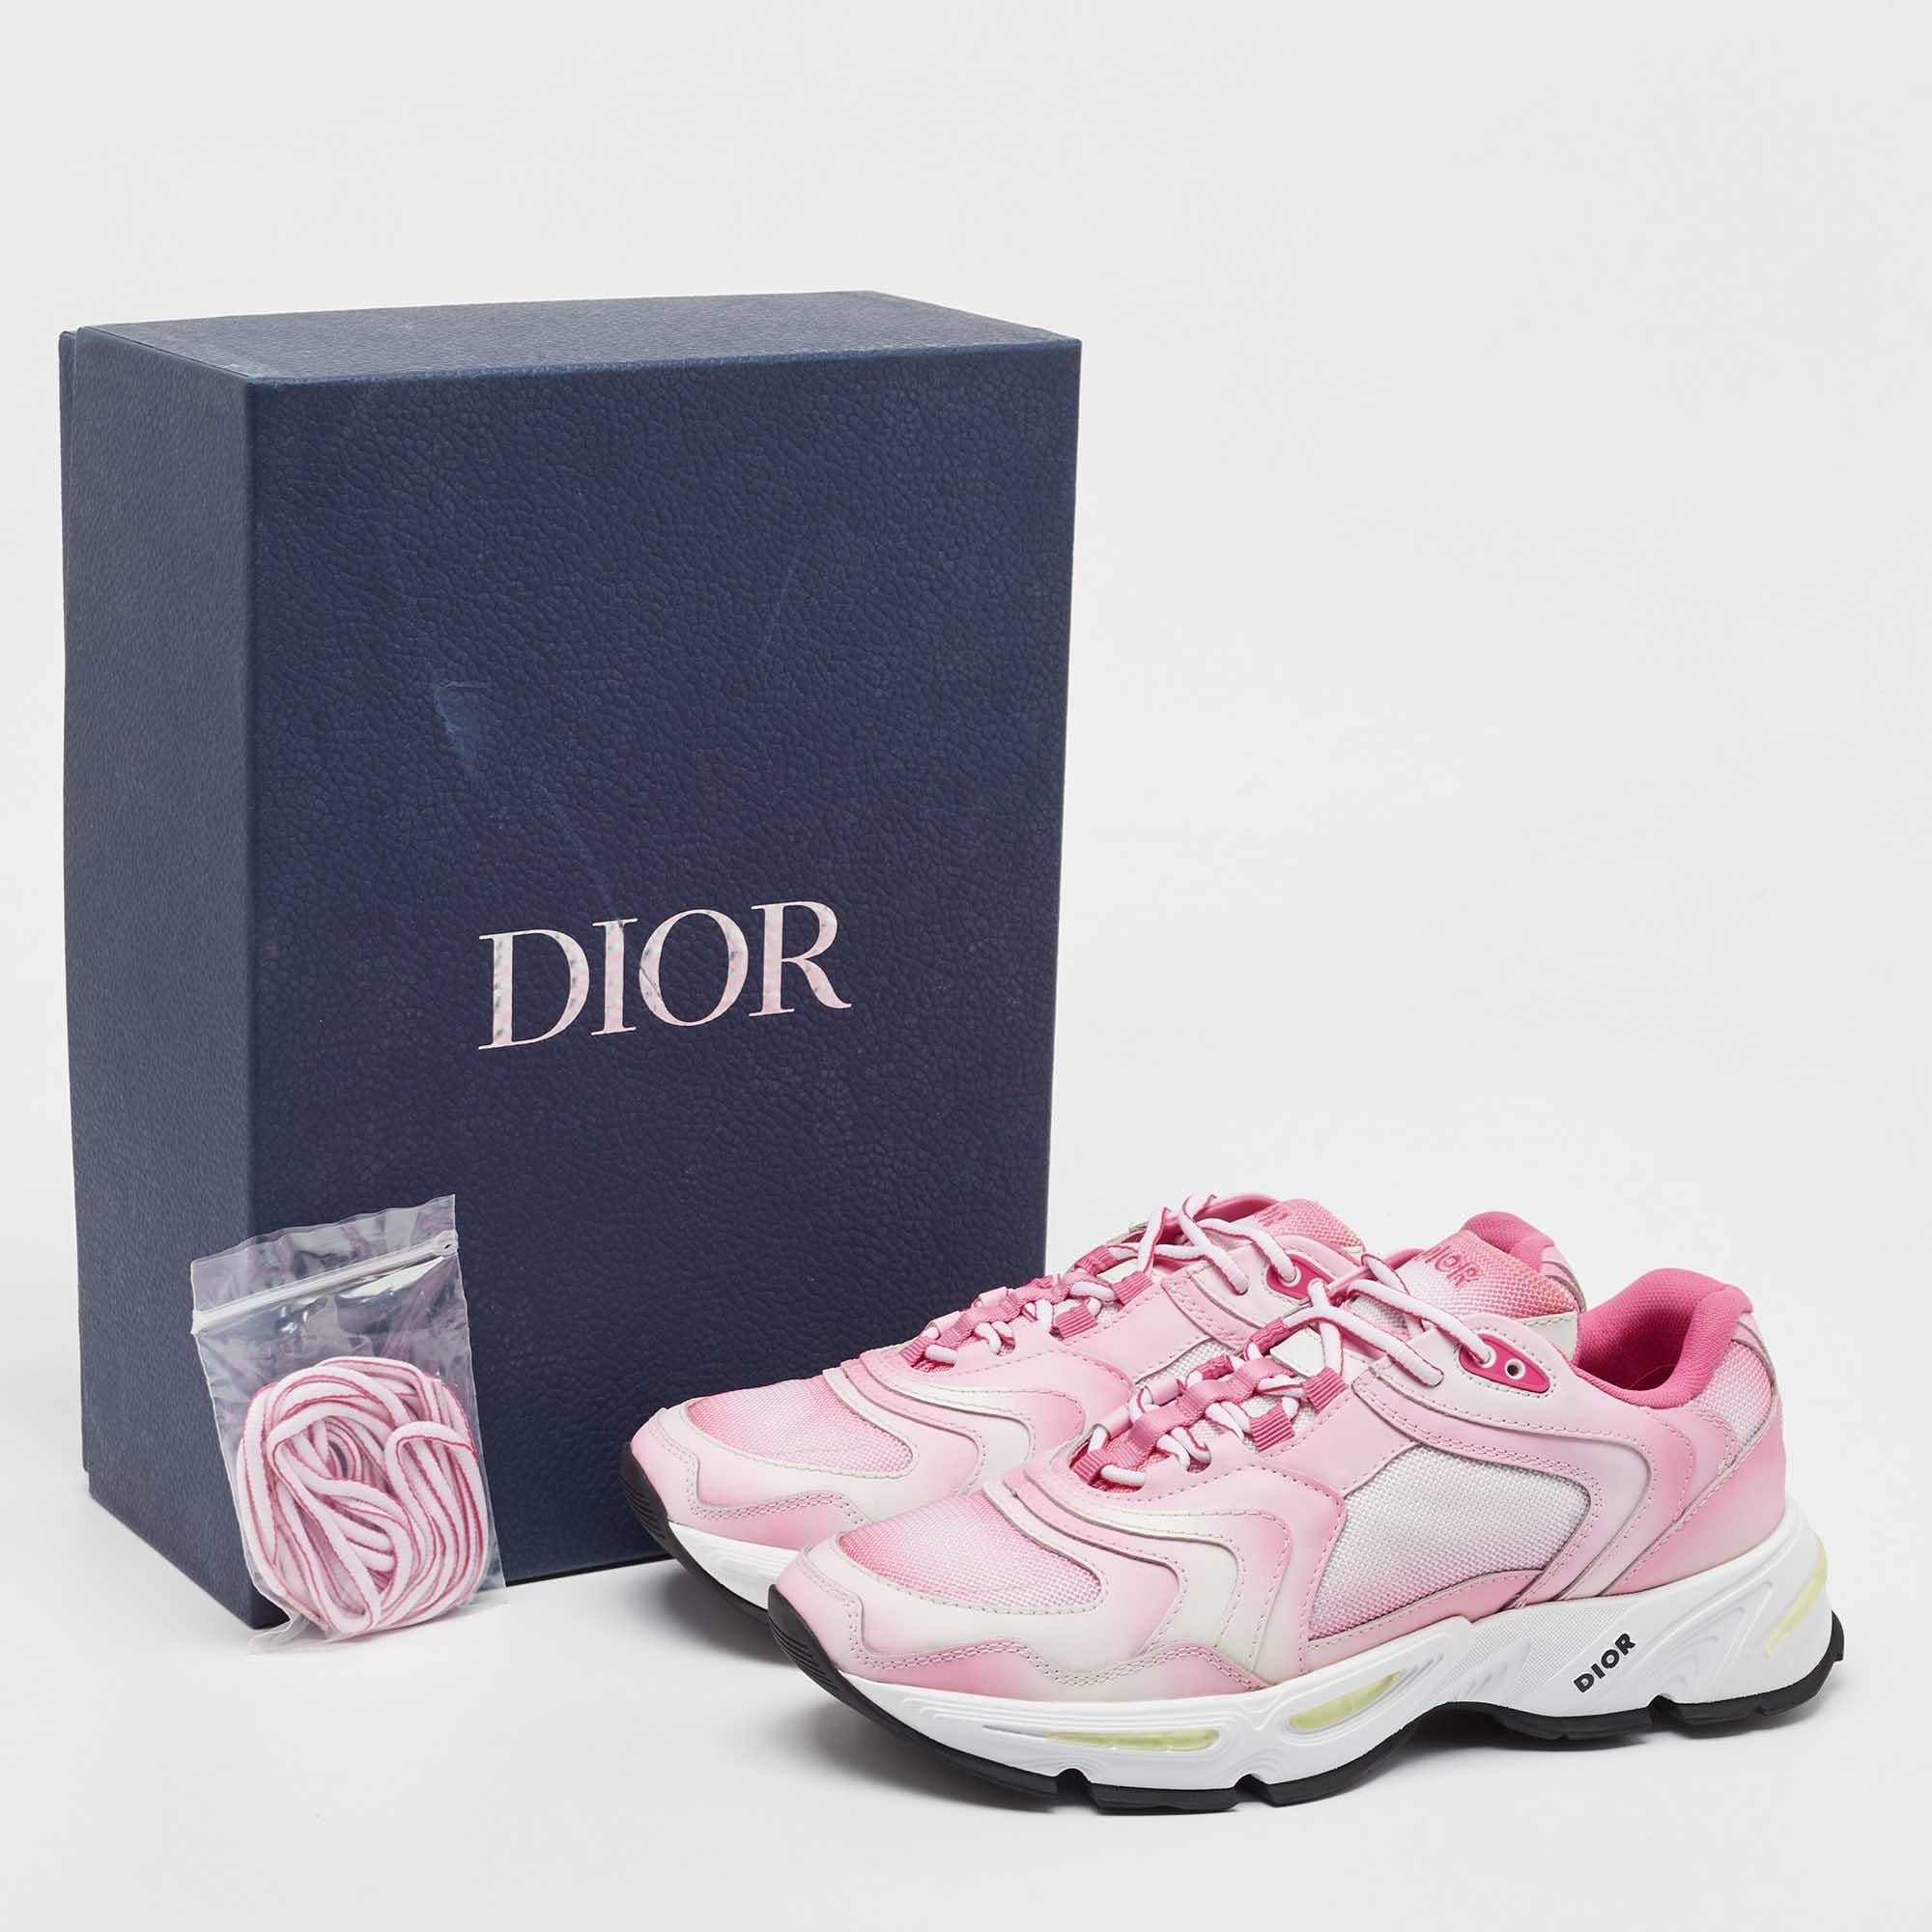 DIOR Pink/White Mesh and Leather CD1 Gradient Sneakers Size 41 For Sale 2